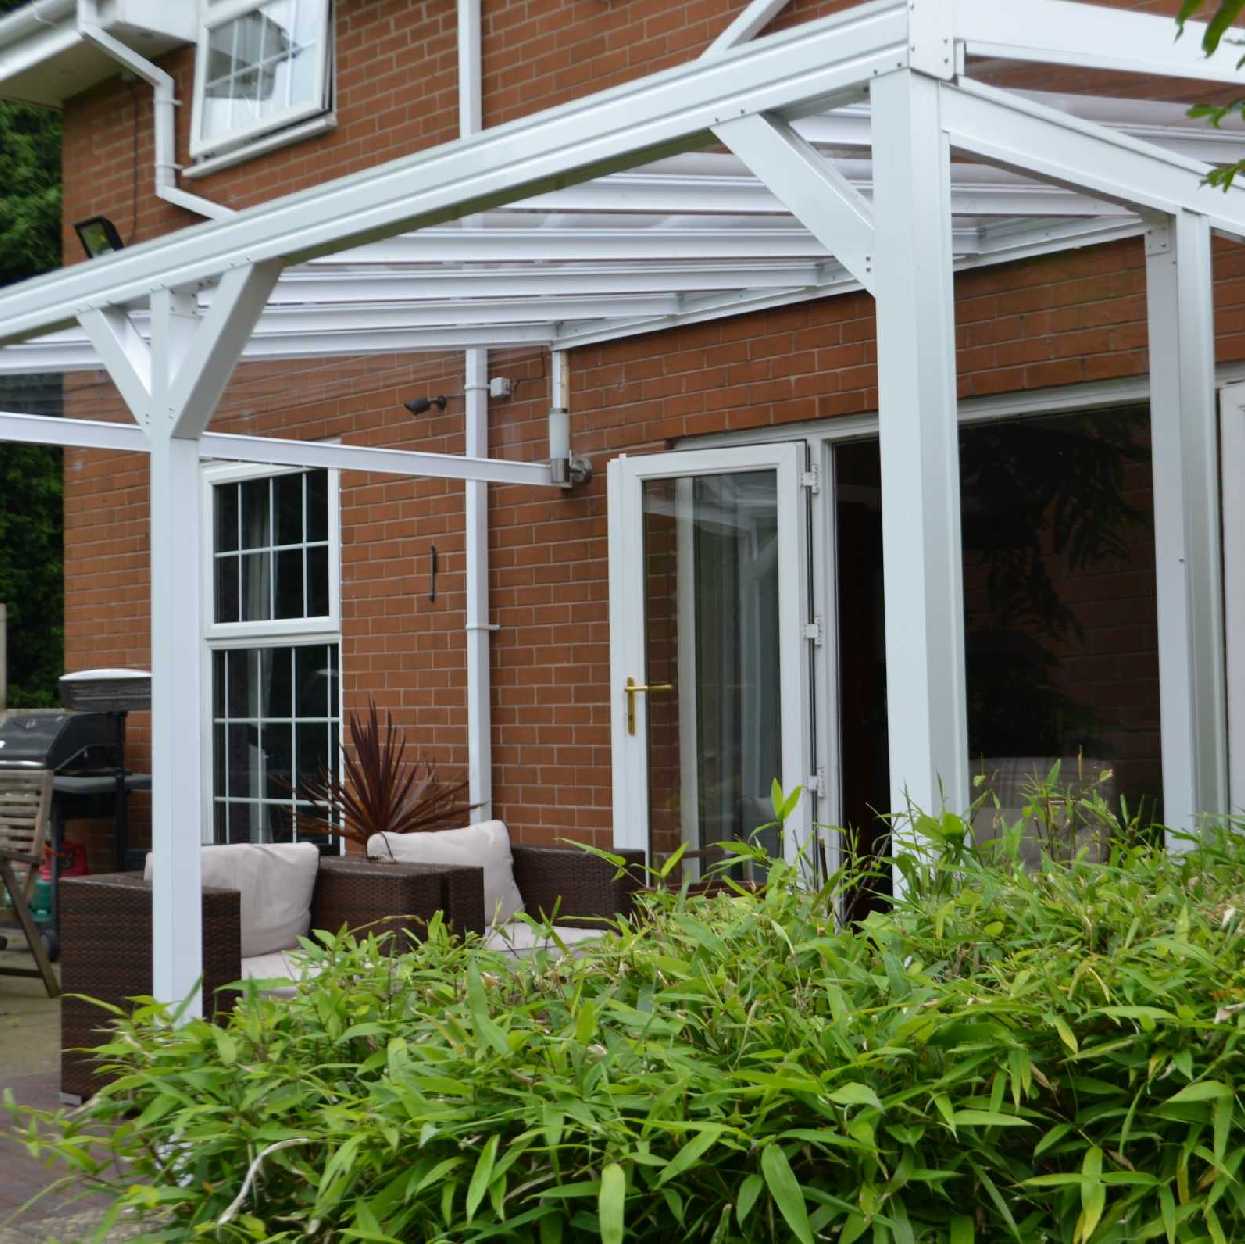 Omega Smart Lean-To Canopy, White with 6mm Glass Clear Plate Polycarbonate Glazing - 7.0m (W) x 3.0m (P), (4) Supporting Posts from Omega Build